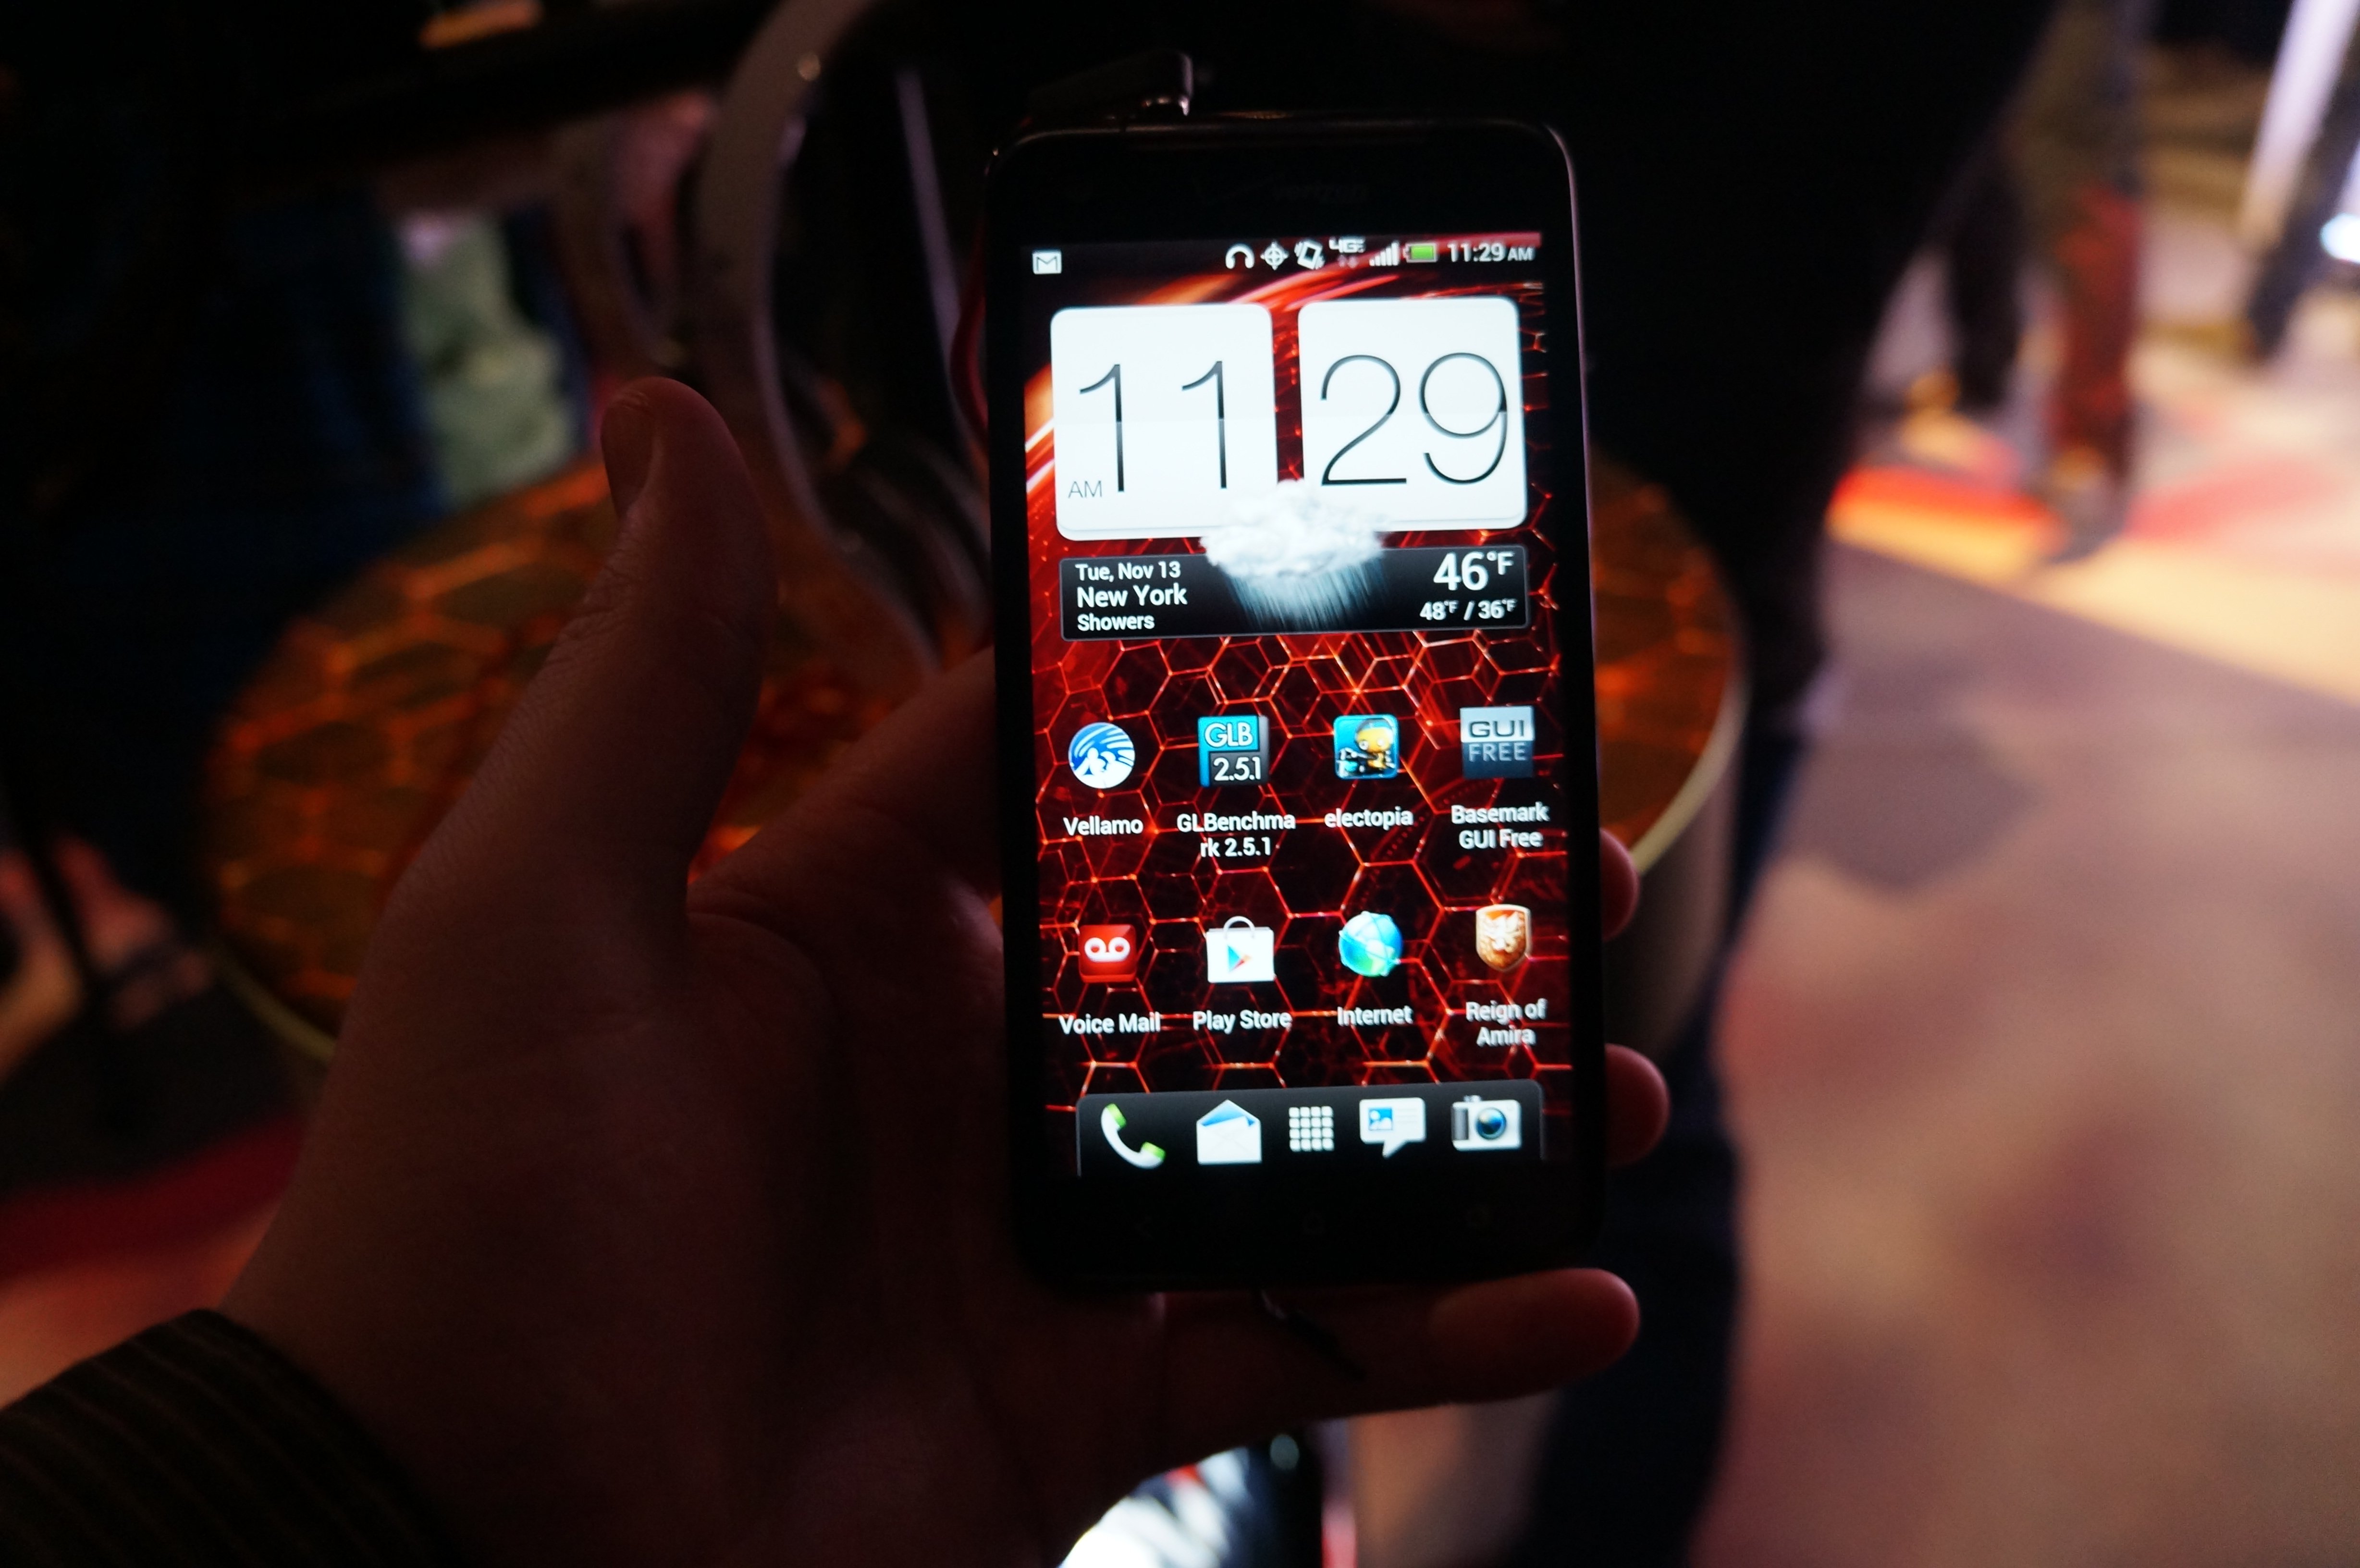 HTC DROID DNA 1